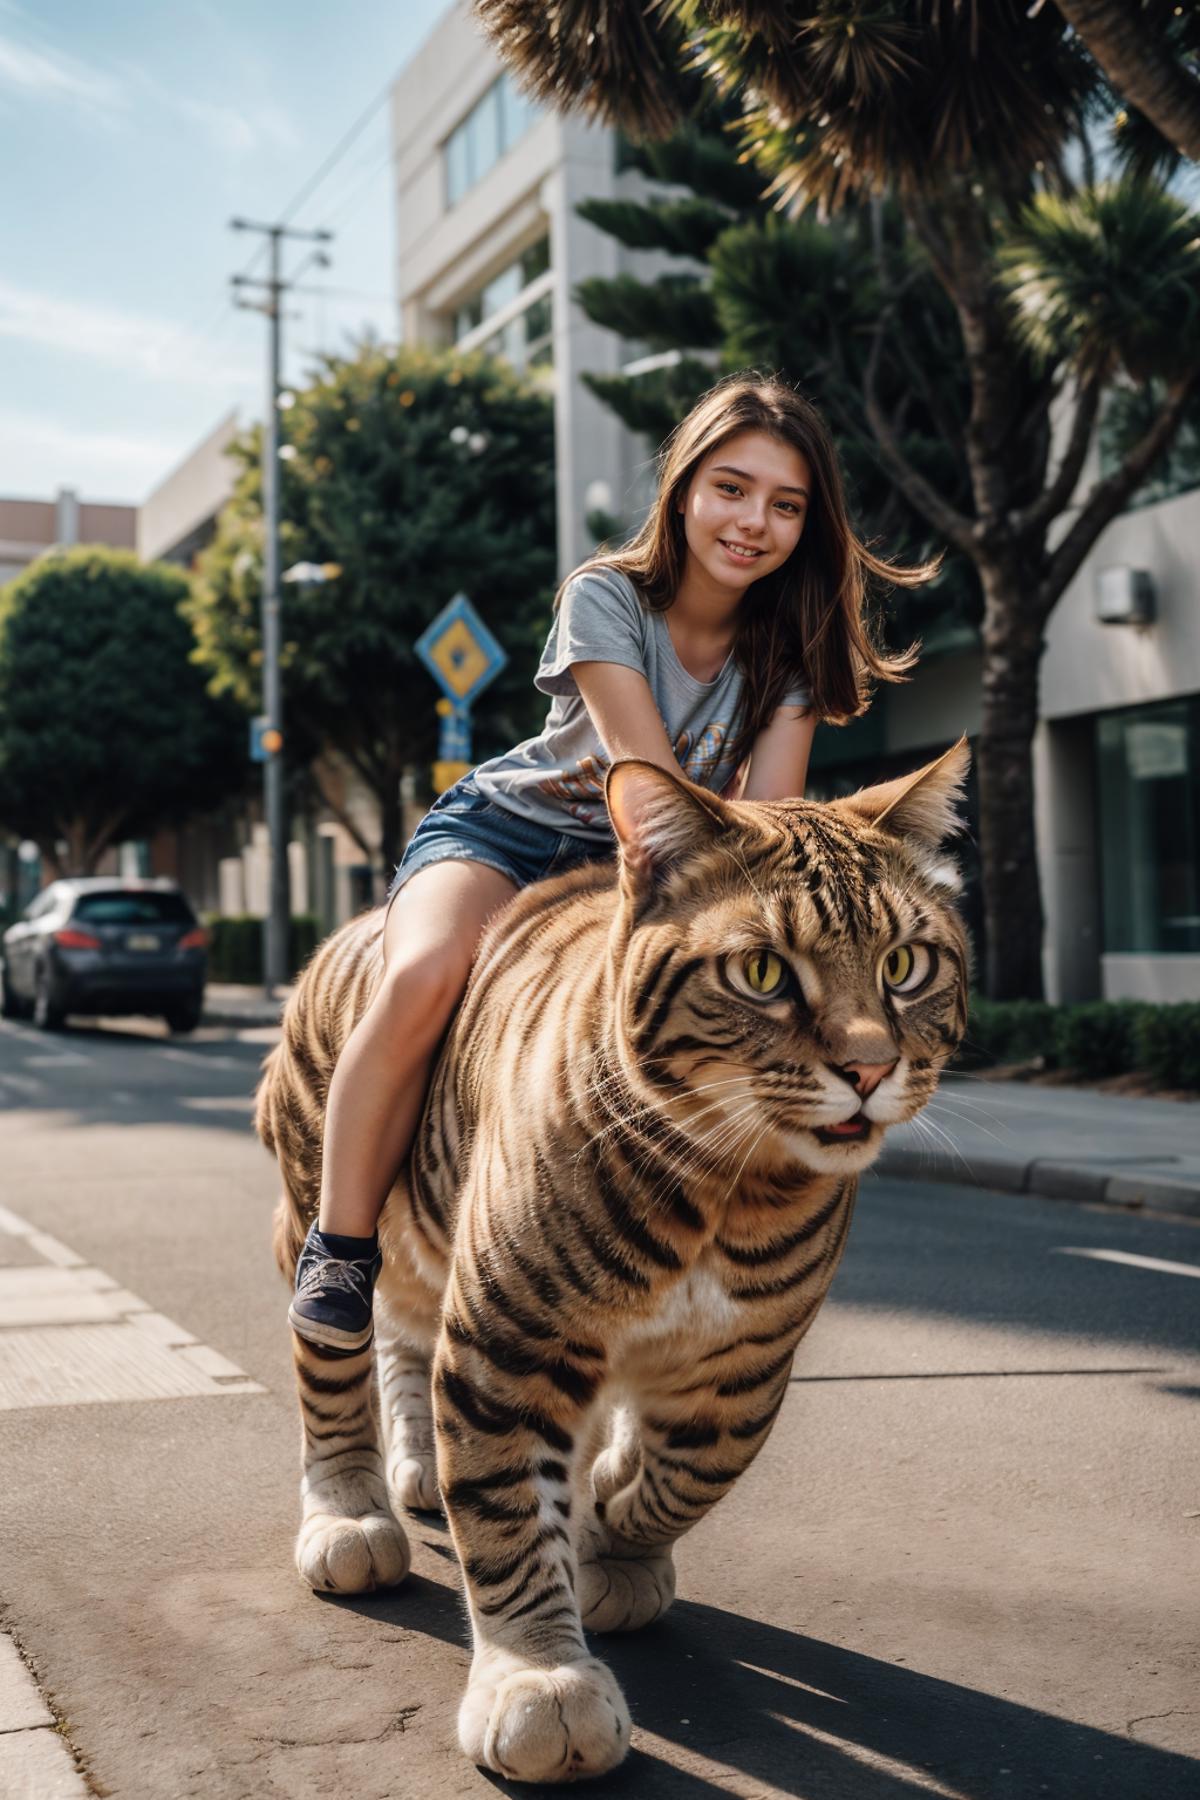 Girl Riding on the Back of a Tiger on a City Street